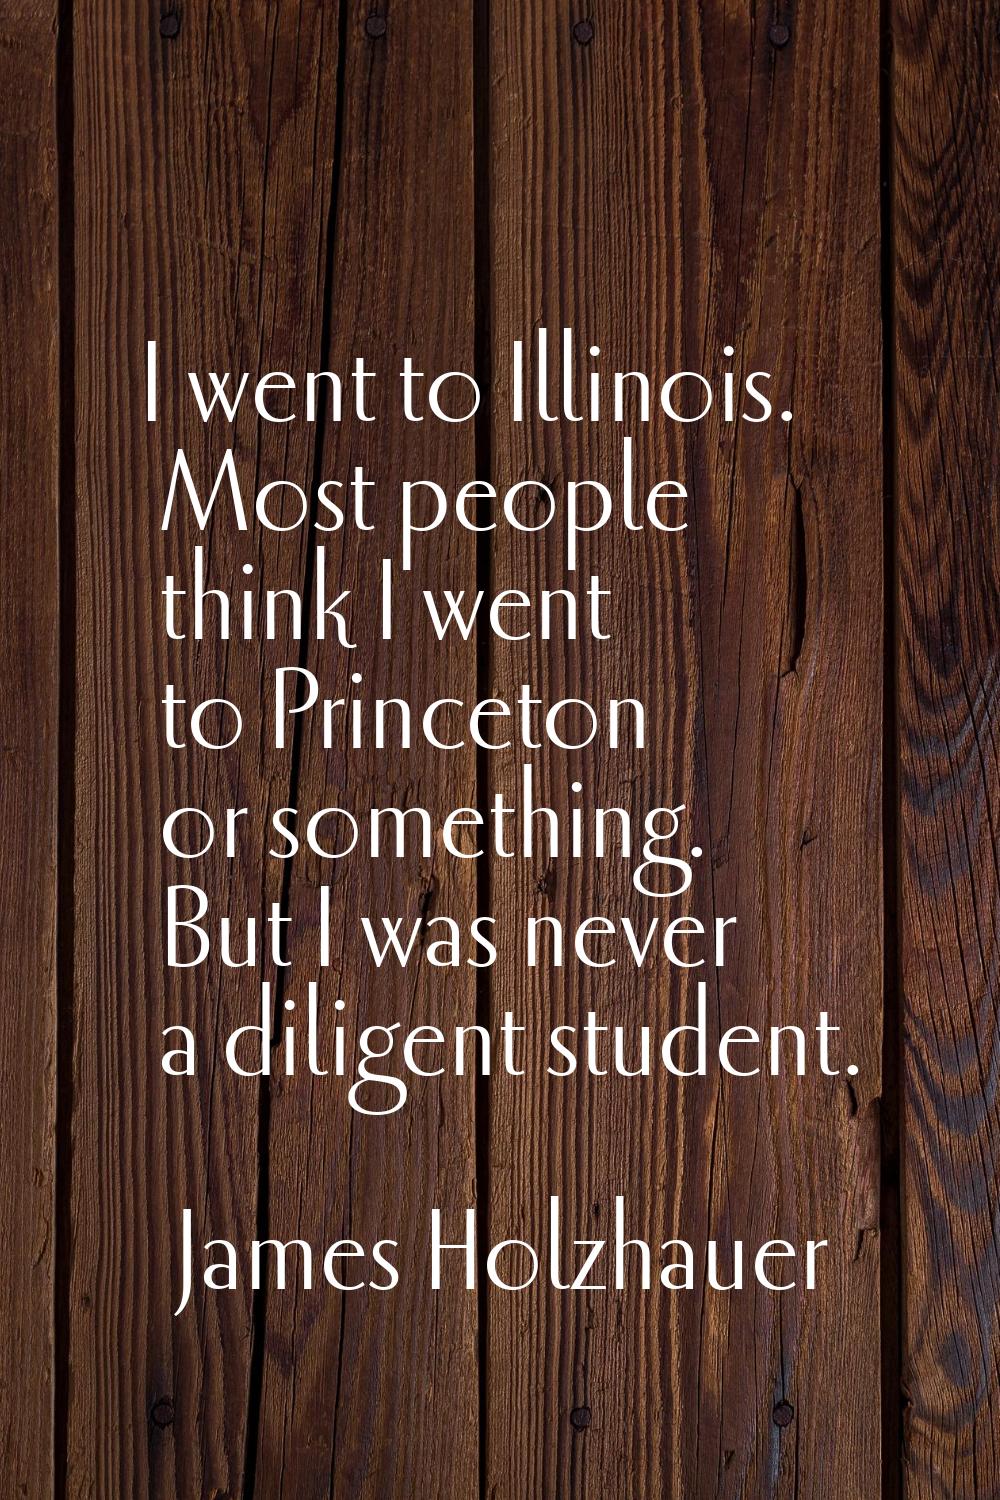 I went to Illinois. Most people think I went to Princeton or something. But I was never a diligent 